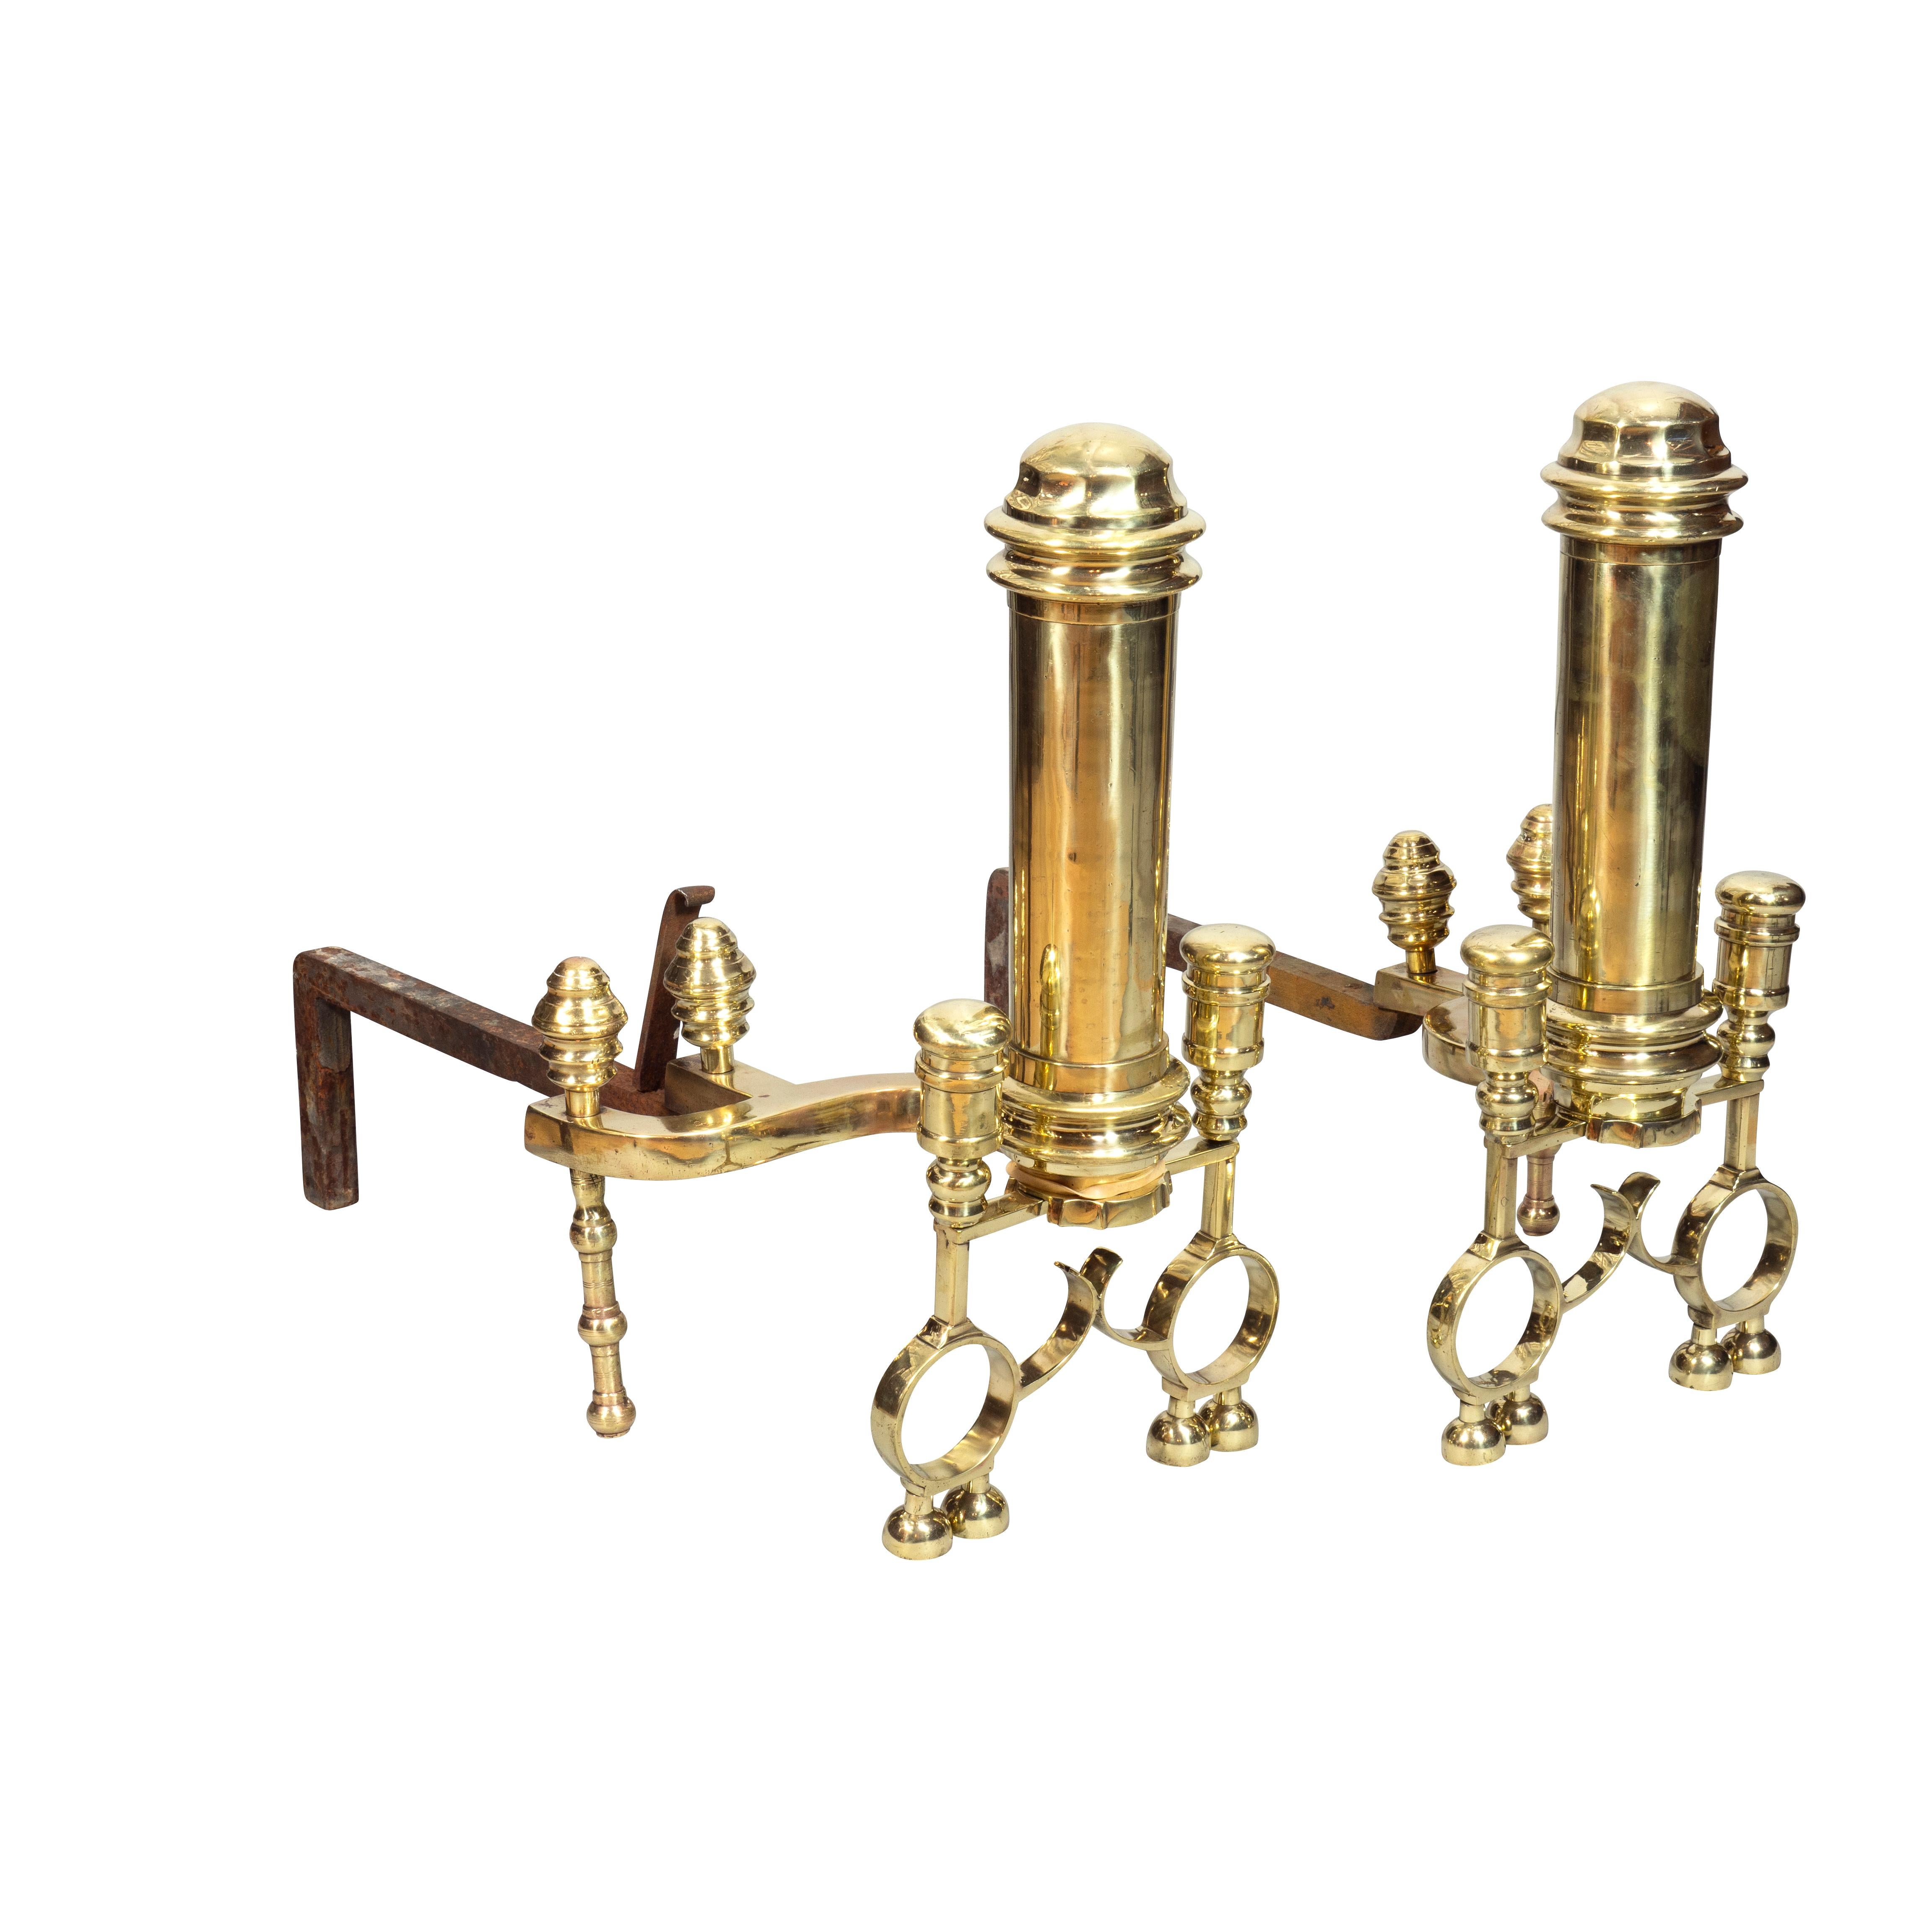 Pair of American Late Federal Brass Andirons In Good Condition For Sale In Essex, MA